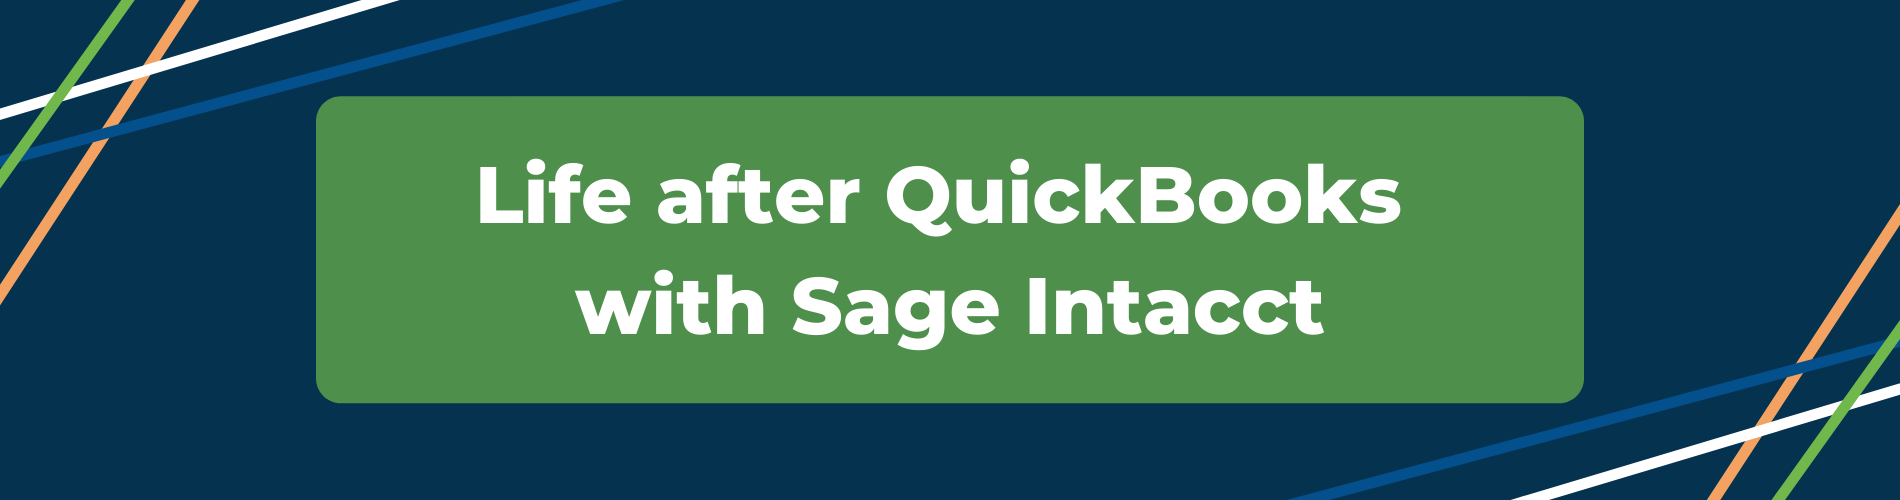 Life after QuickBooks with Sage Intacct